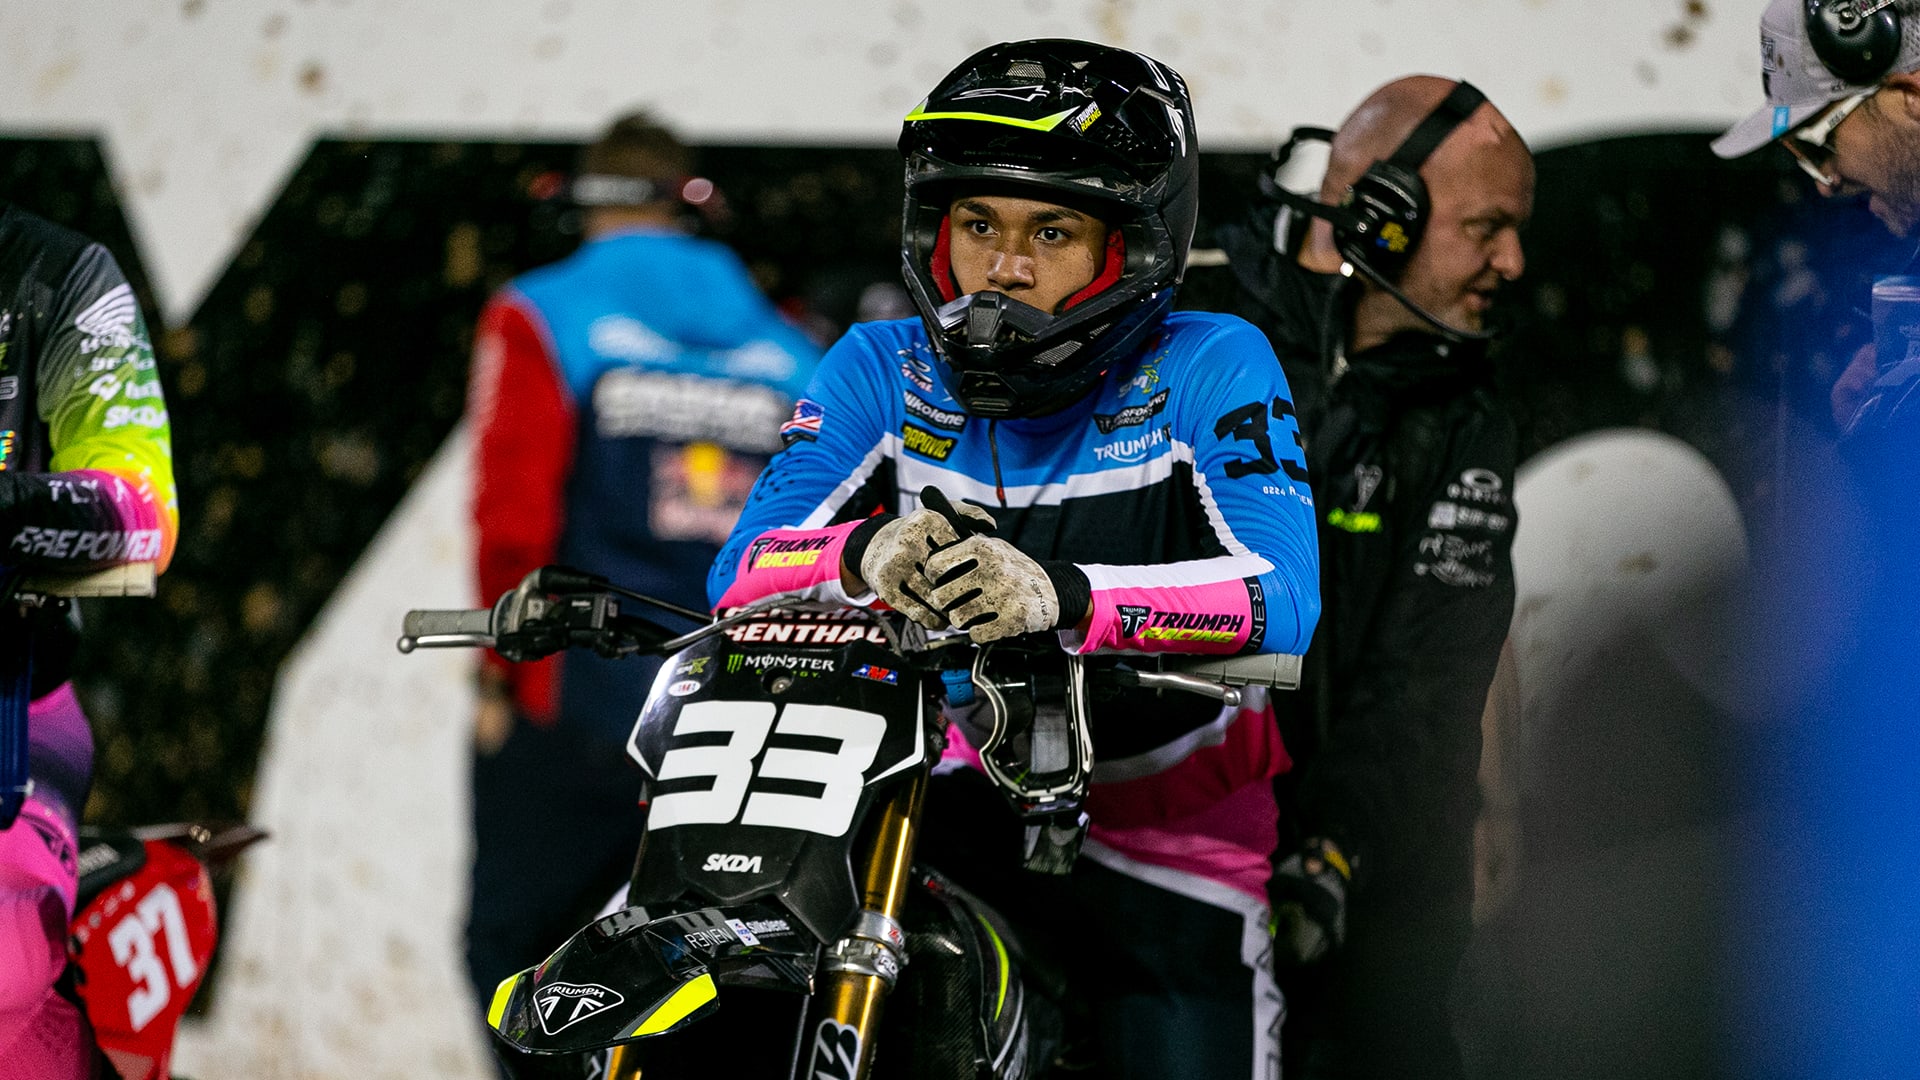 Jalek Swoll looking focused at the third round of the Monster Energy AMA 250SX East championship held in Daytona